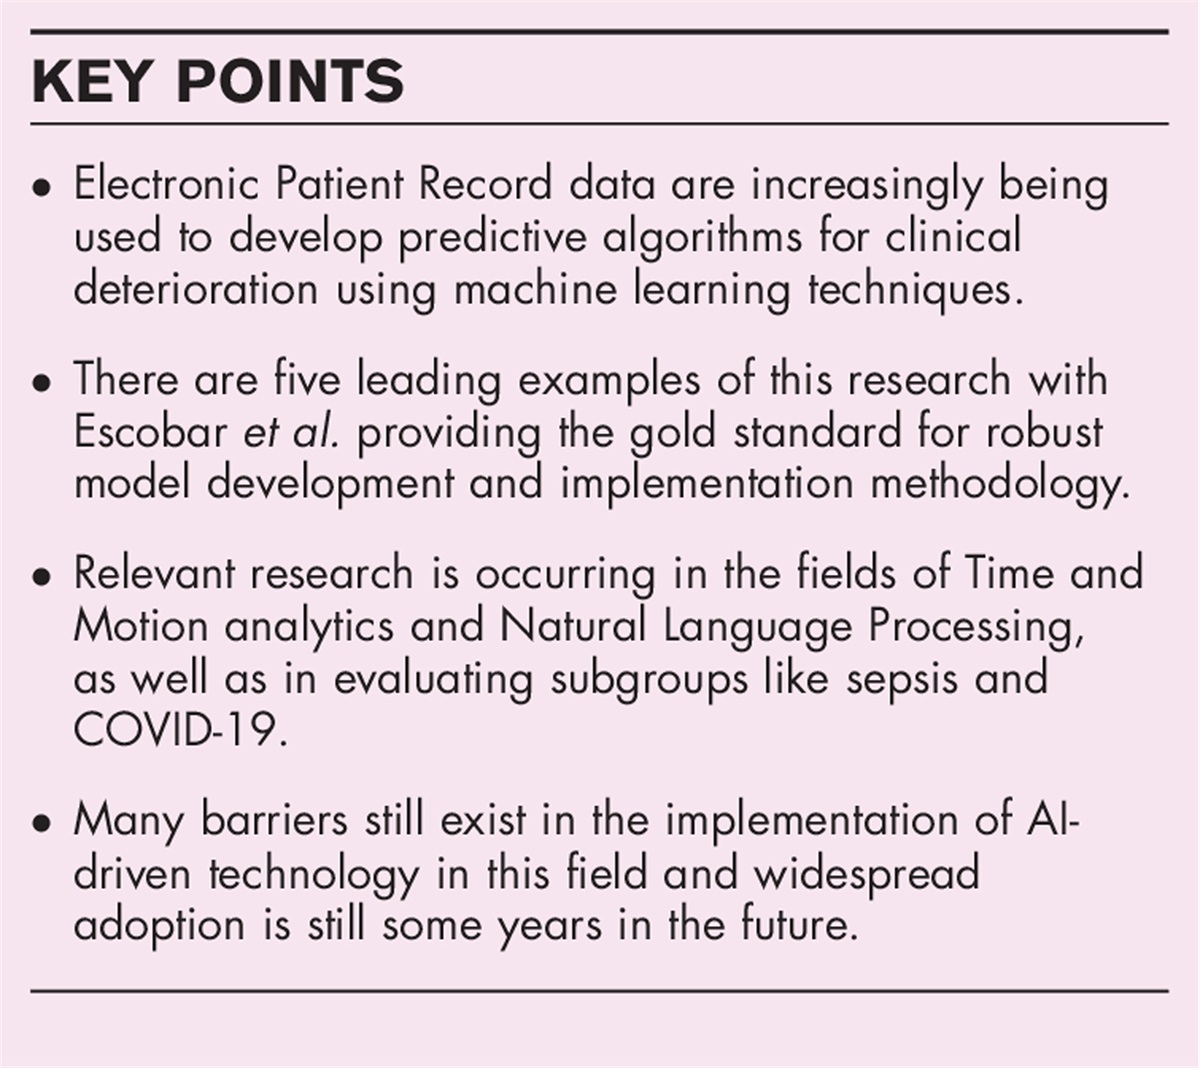 Artificial intelligence and clinical deterioration